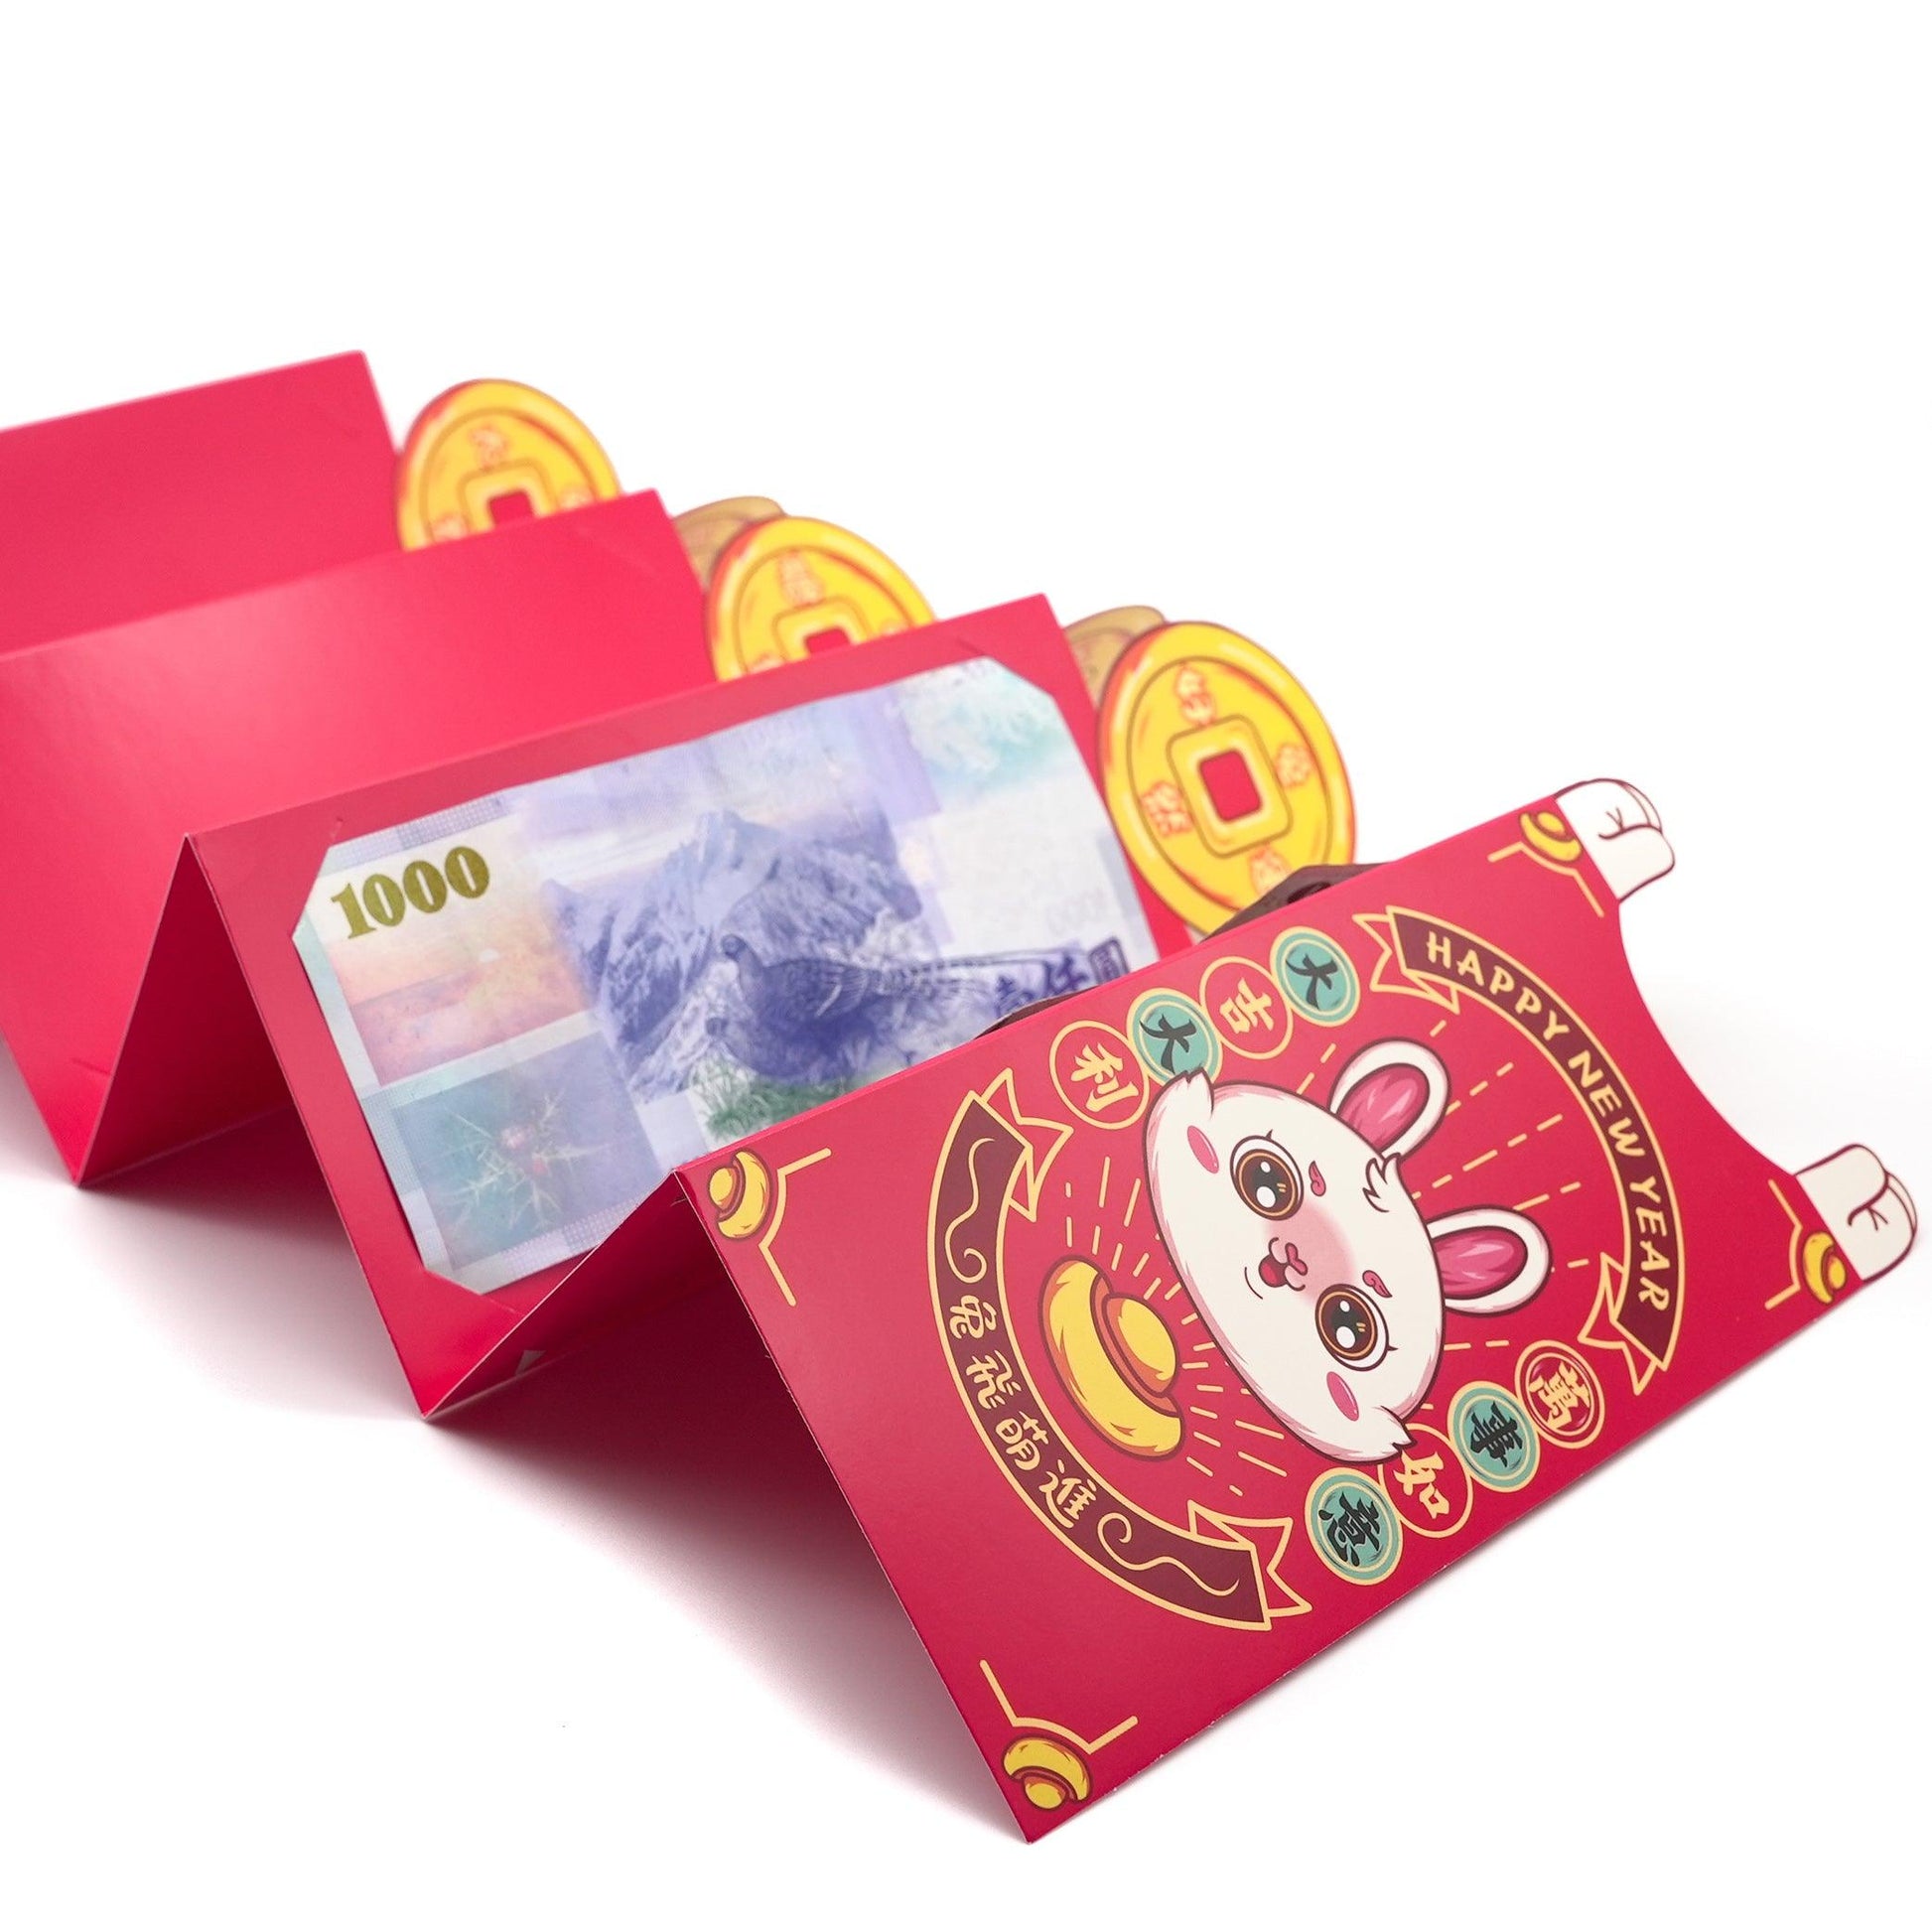 Chinese Red Envelope/ Packet for New Year, Lucky Money